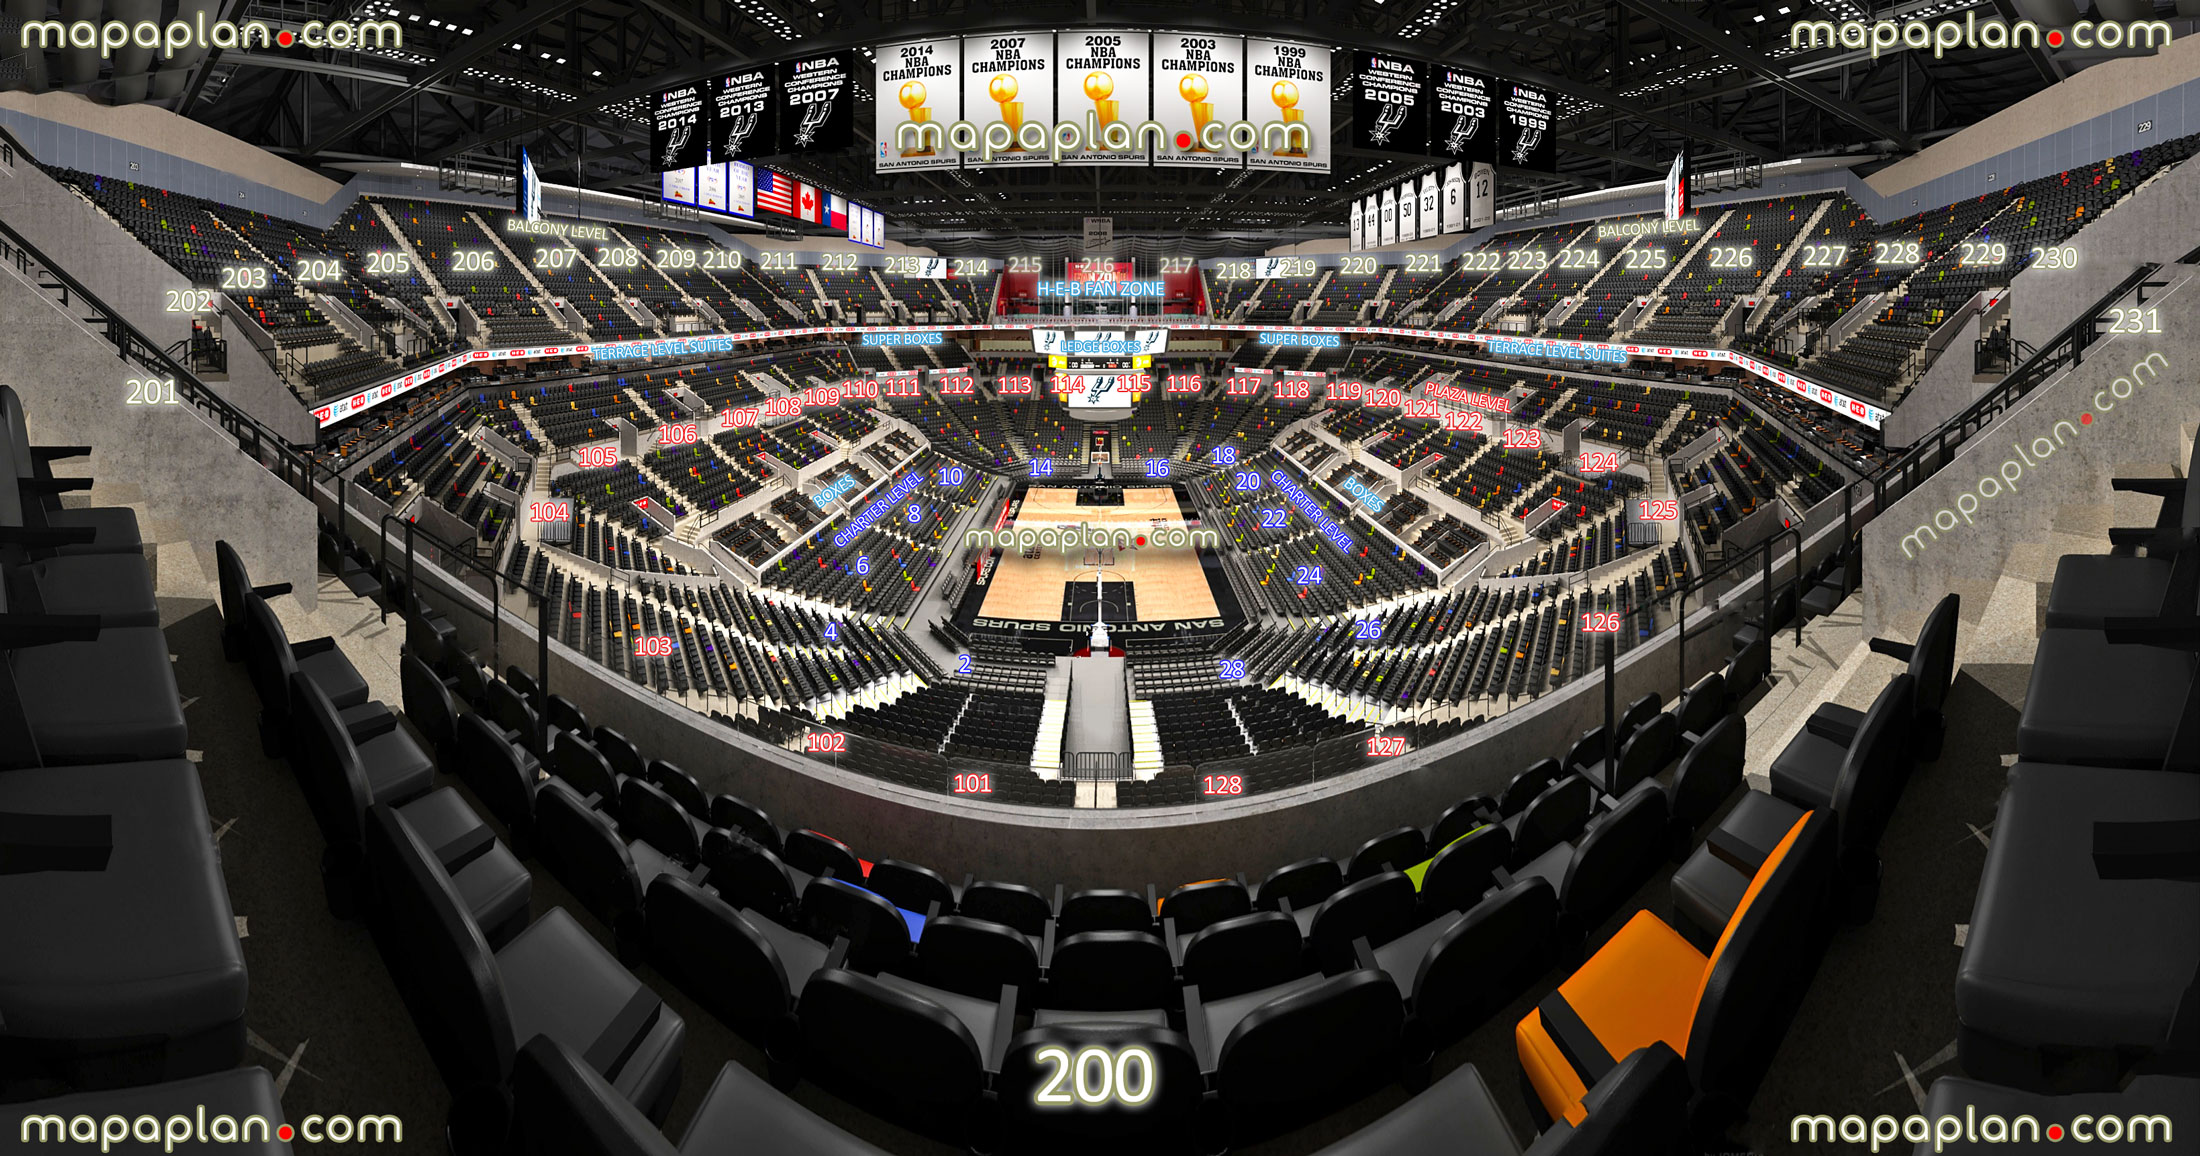 view section 200 row 5 seat 8 spurs silver stars basketball best seat selection information guide virtual interactive image map balcony level sections 200 201 202 203 204 205 206 207 208 209 210 211 212 213 214 215 216 217 218 219 220 221 222 223 224 225 226 227 228 229 230 231 San Antonio Frost Bank Center seating chart